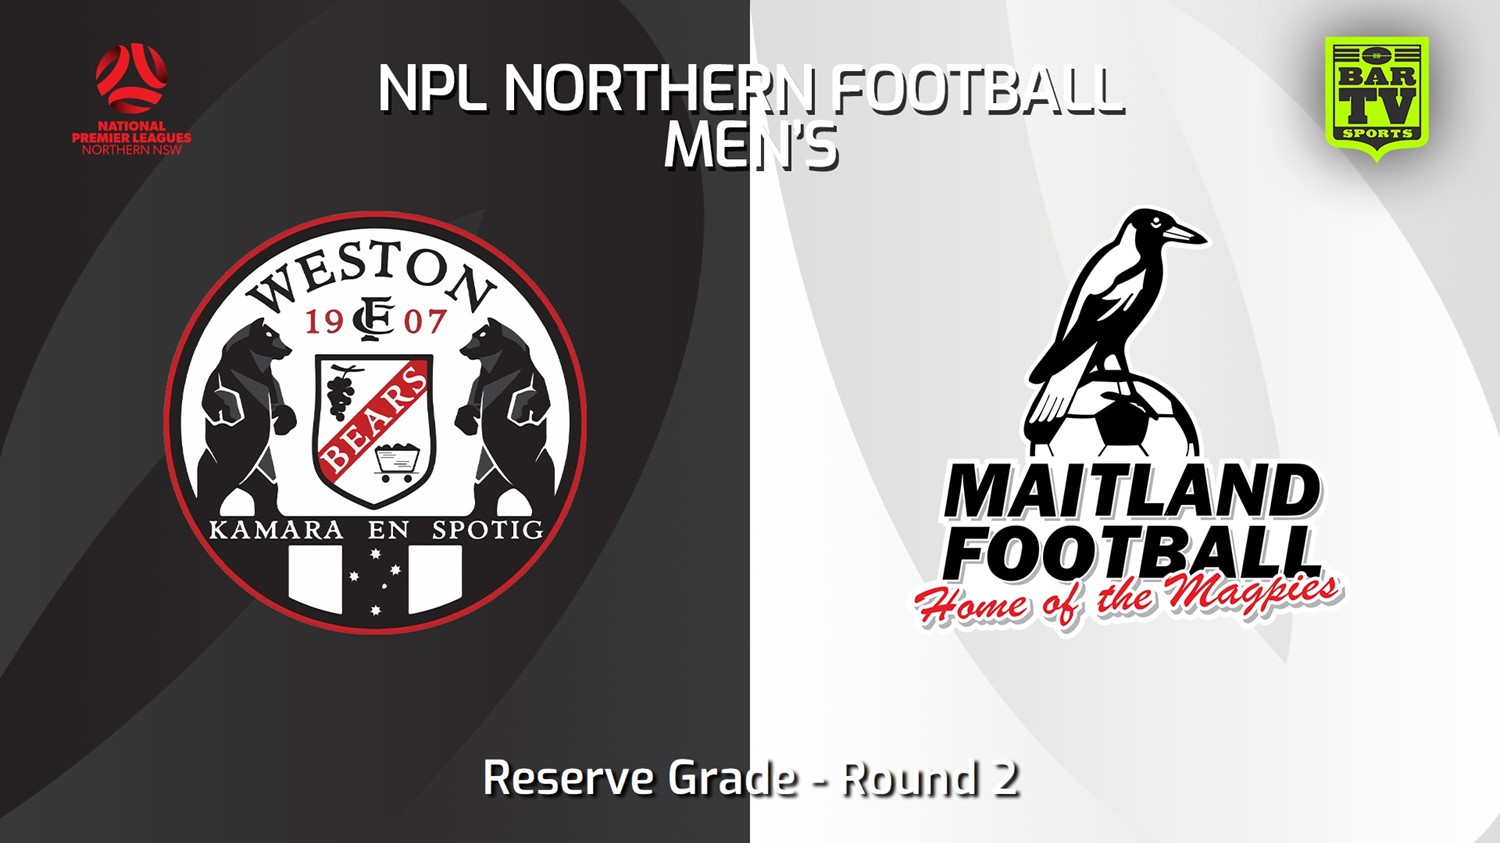 240302-NNSW NPLM Res Round 2 - Weston Workers FC Res v Maitland FC Res Minigame Slate Image